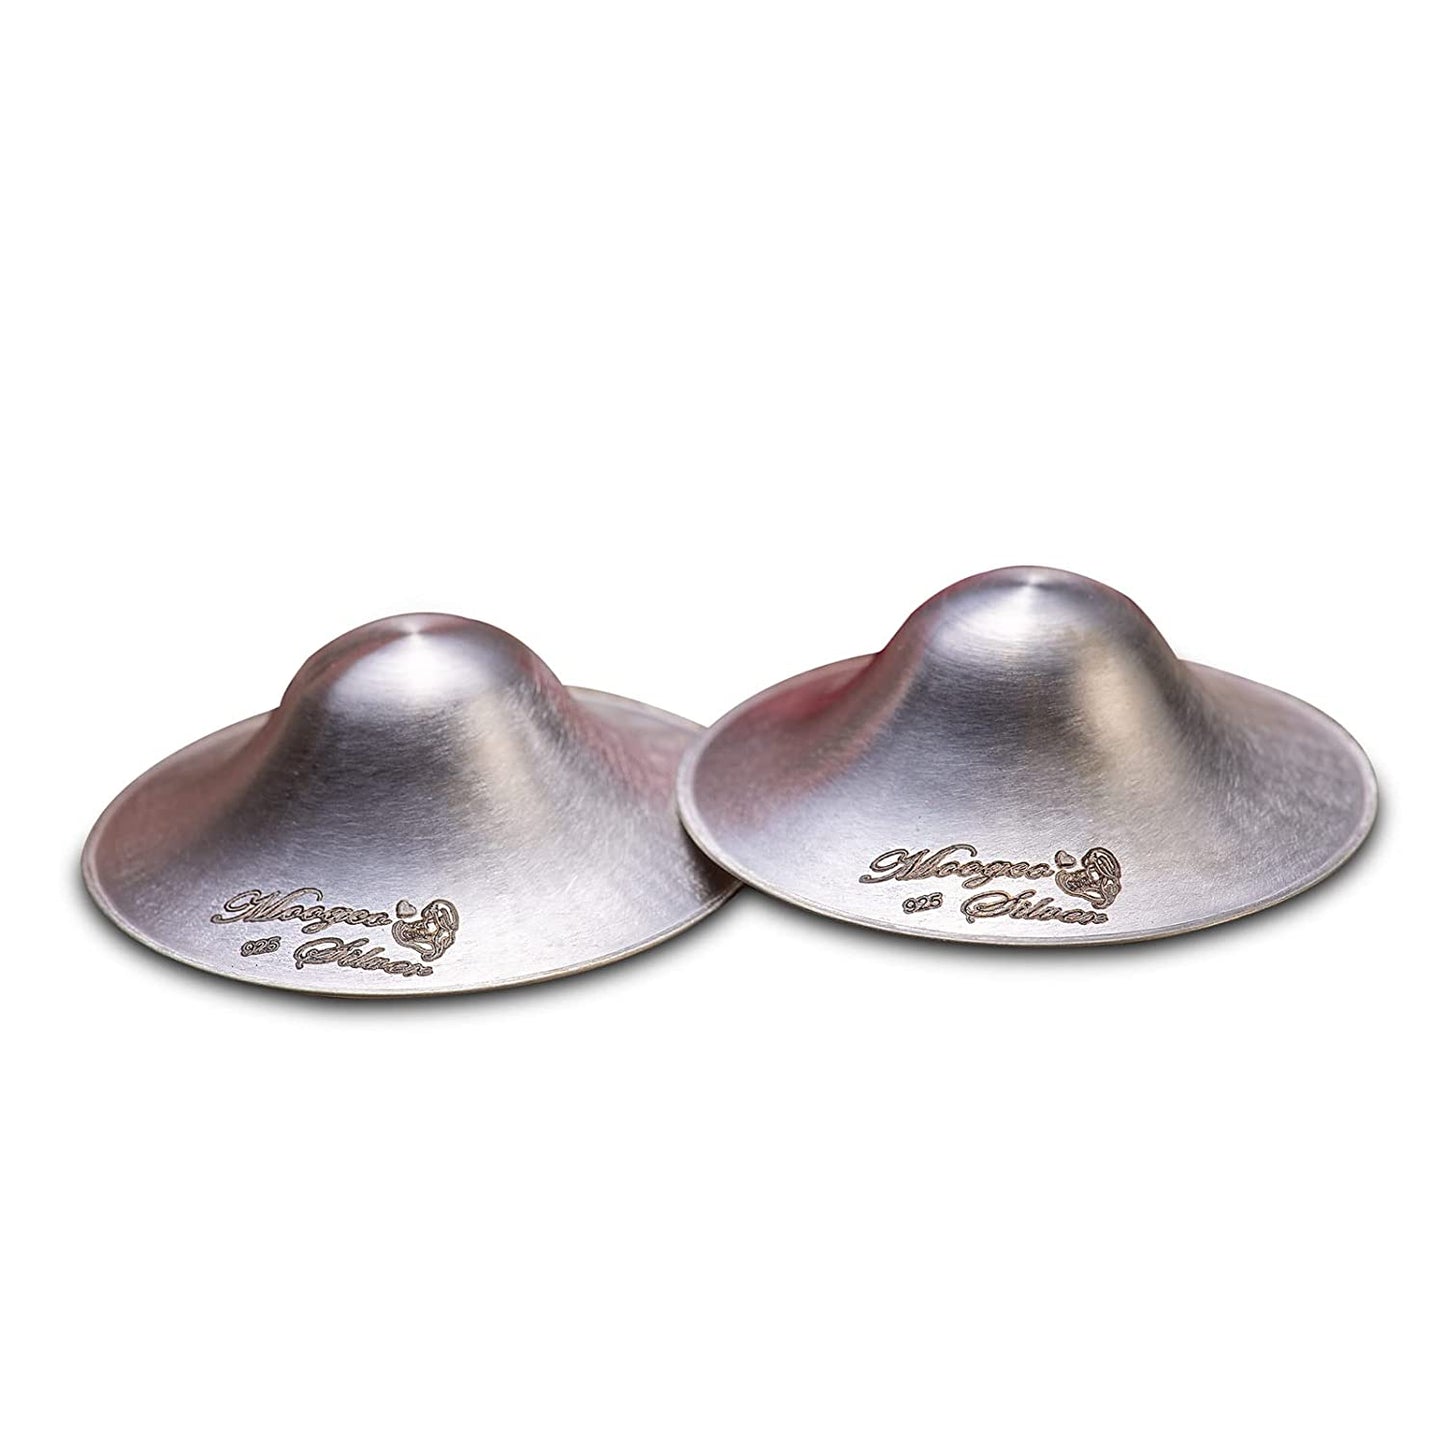 SILVERETTE The Original Silver Nursing Cups, Silverettes Metal Nipple  Covers for Breastfeeding, Nursing Shield, 925 Silver Nipple Cover Guards,  Soothe and Protect Sore Nipples -Made in Italy Regular 